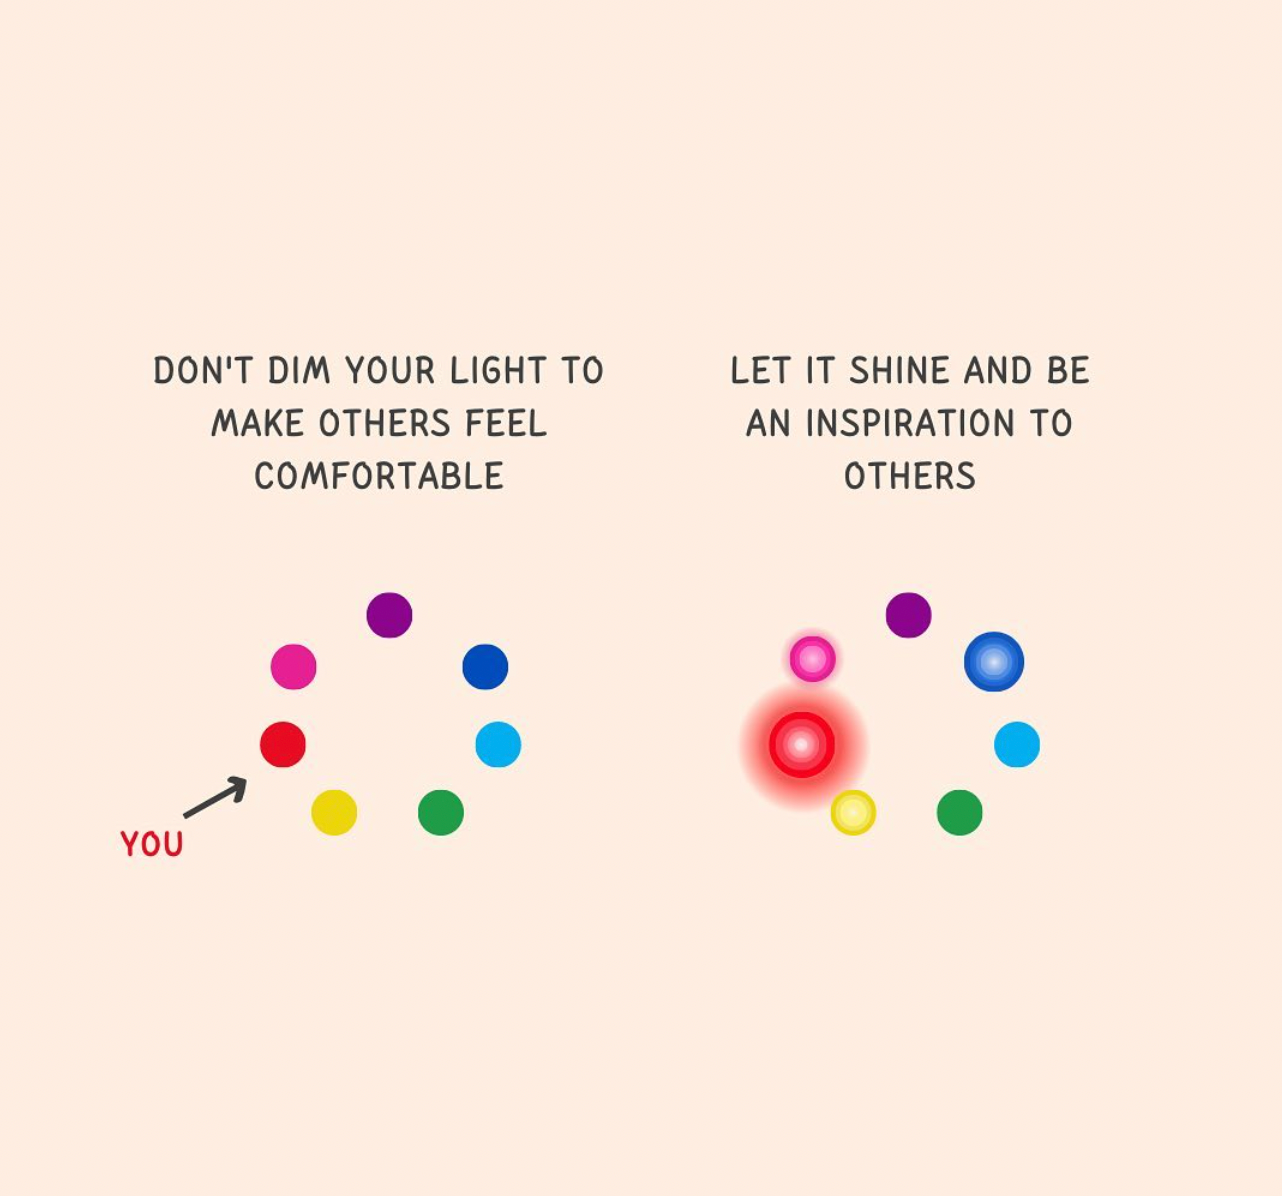 Monday Inspiration: Be an inspiration to others